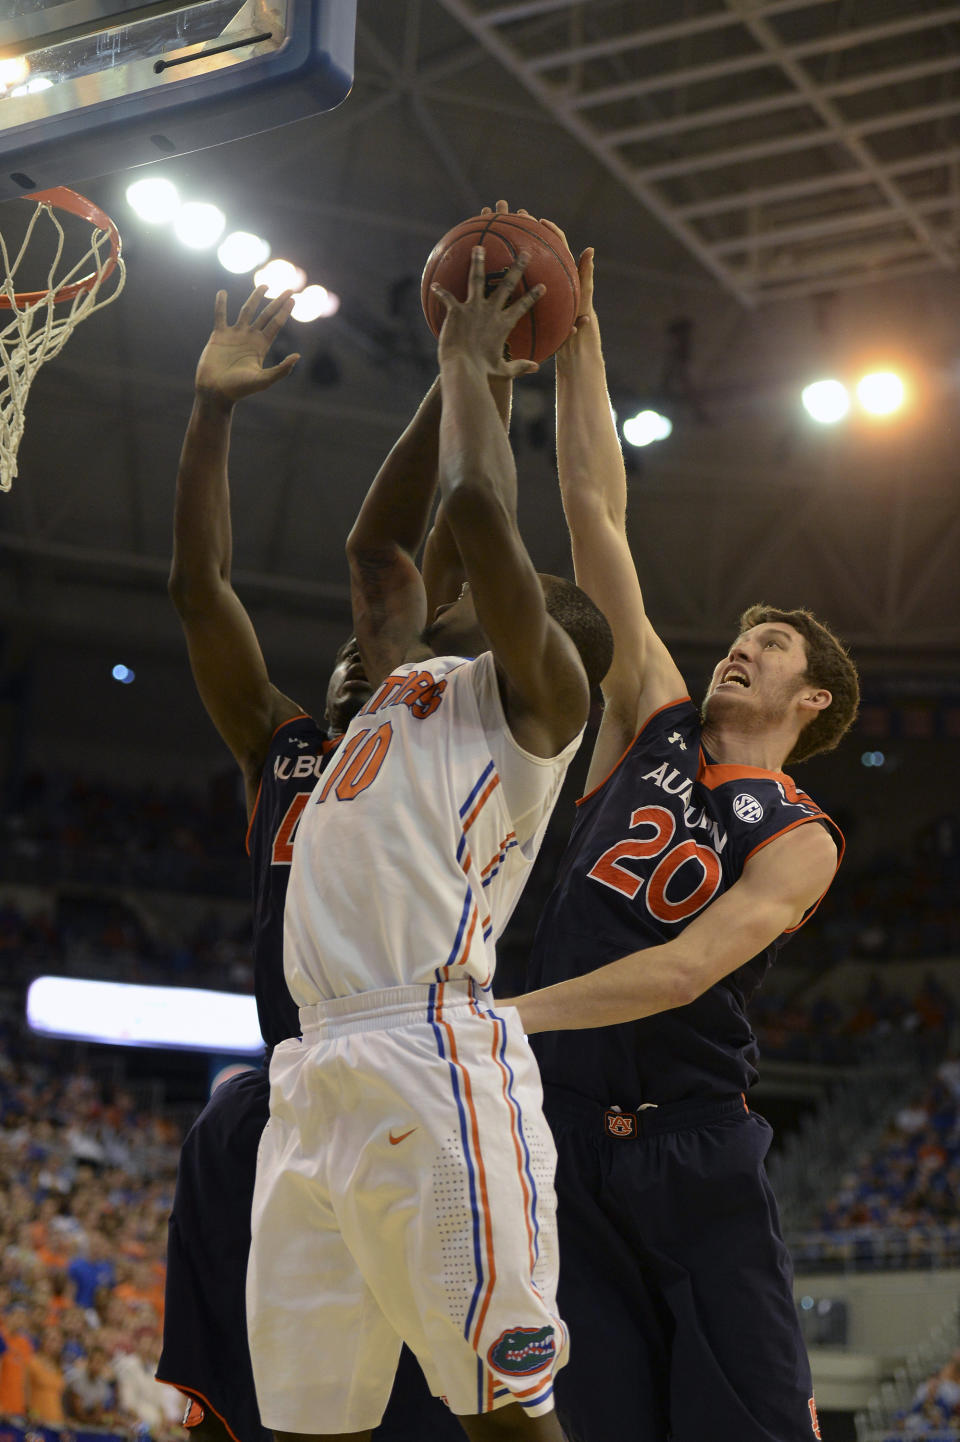 Auburn forward Alex Thompson (20) gets a hand on the ball to keep Florida forward Dorian Finney-Smith (10) from making his shot during the first half of an NCAA college basketball game Wednesday Feb. 19, 2014 in Gainesville, Fla. (AP Photo/Phil Sandlin)